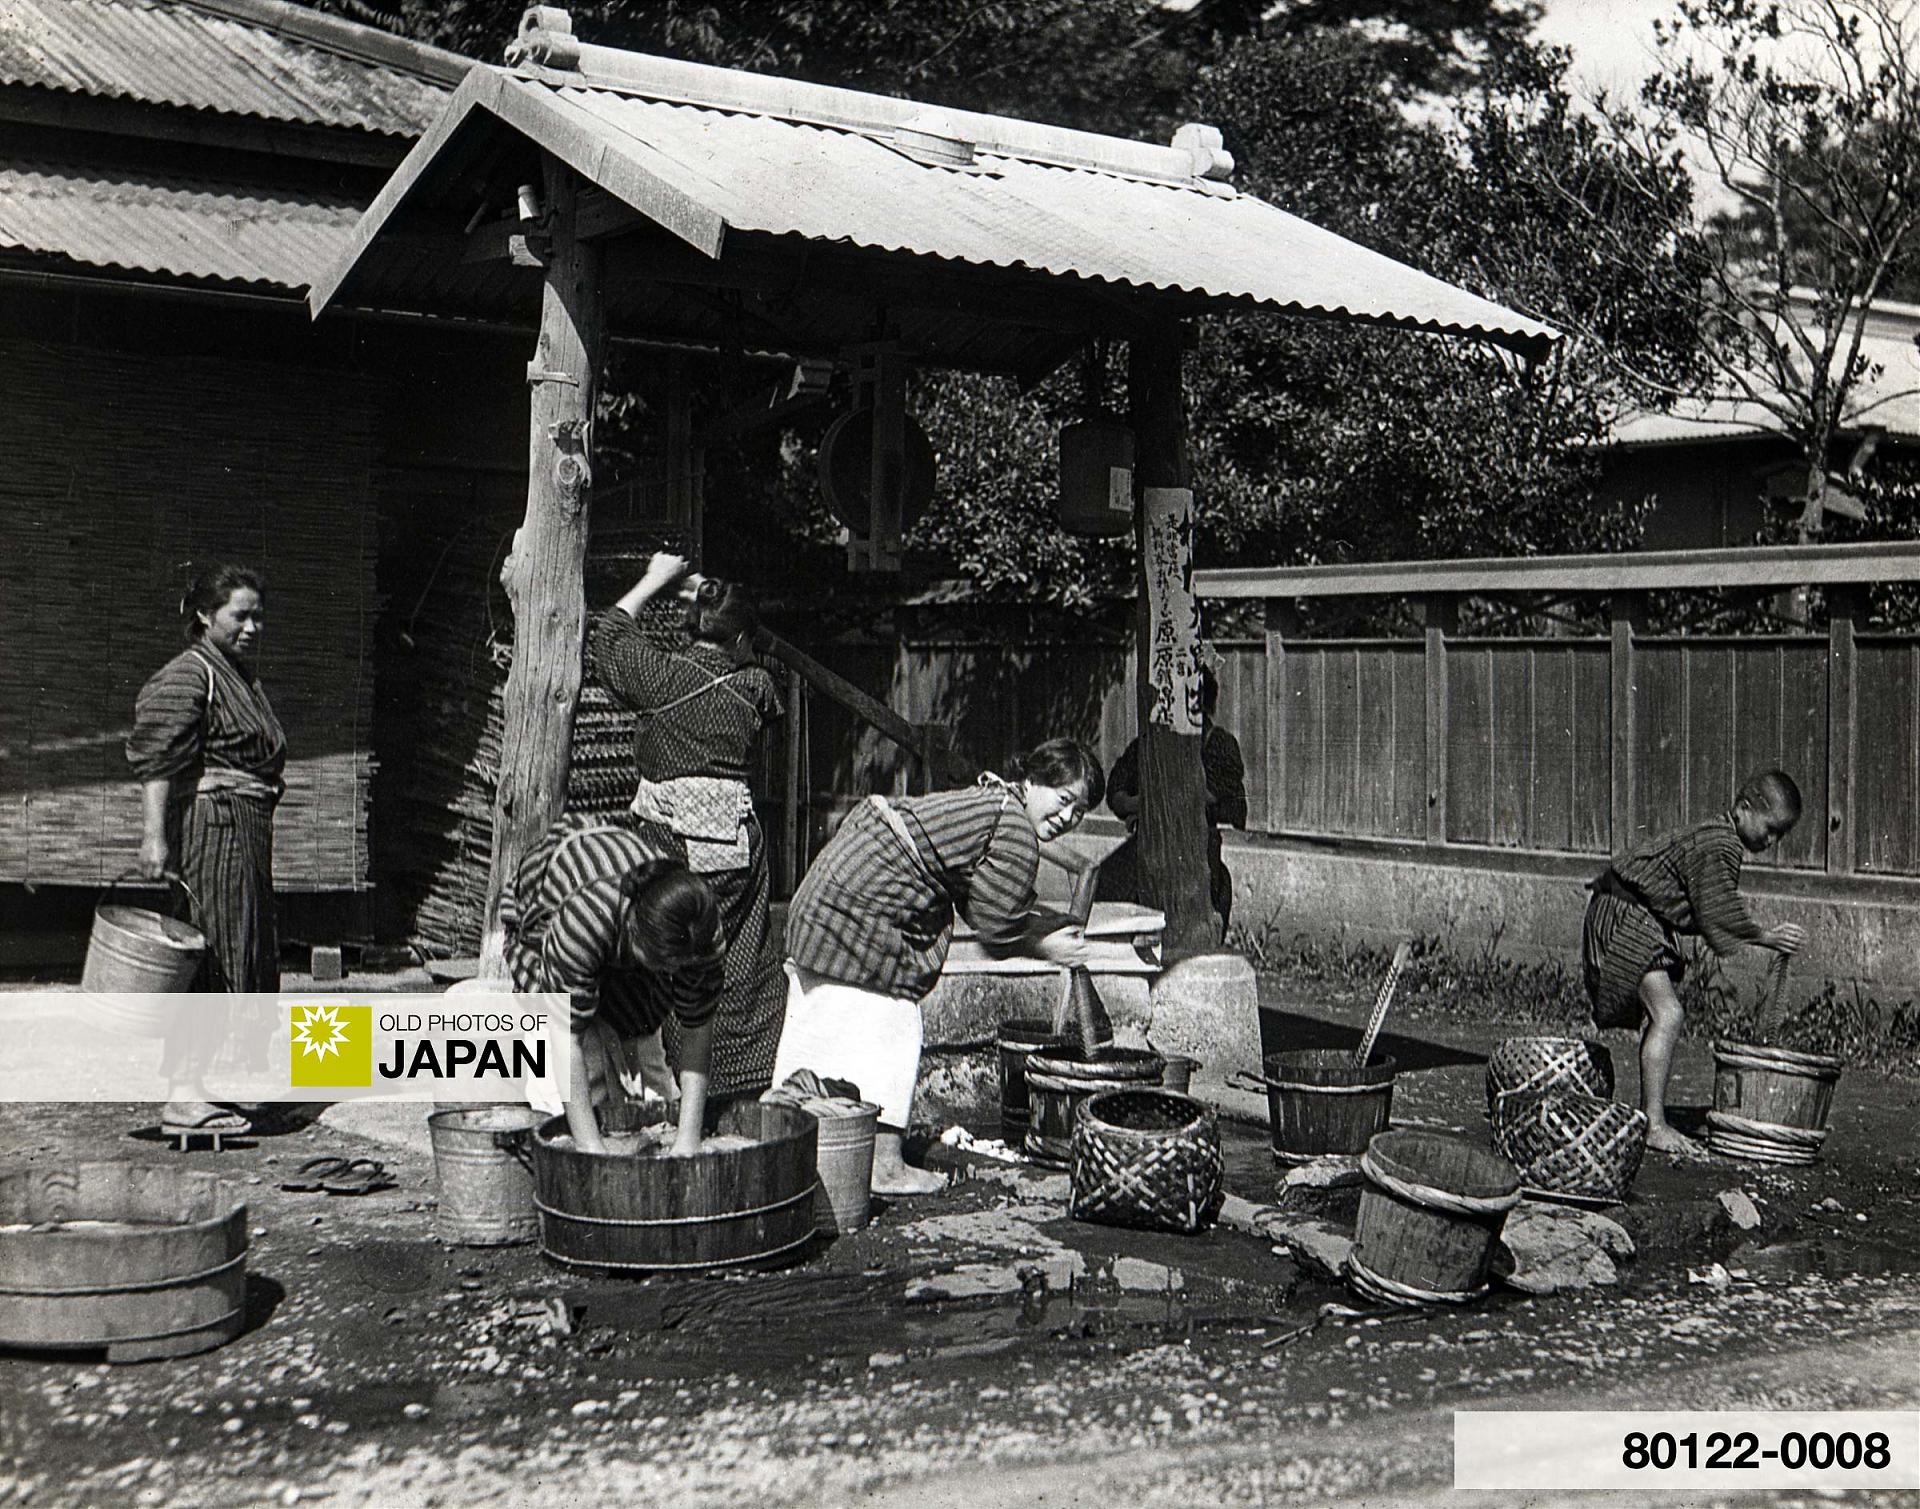 80122-0008 - Japanese Women Washing Clothes in Small Tubs at Public Washing Place in Kamakura, Japan, 1930